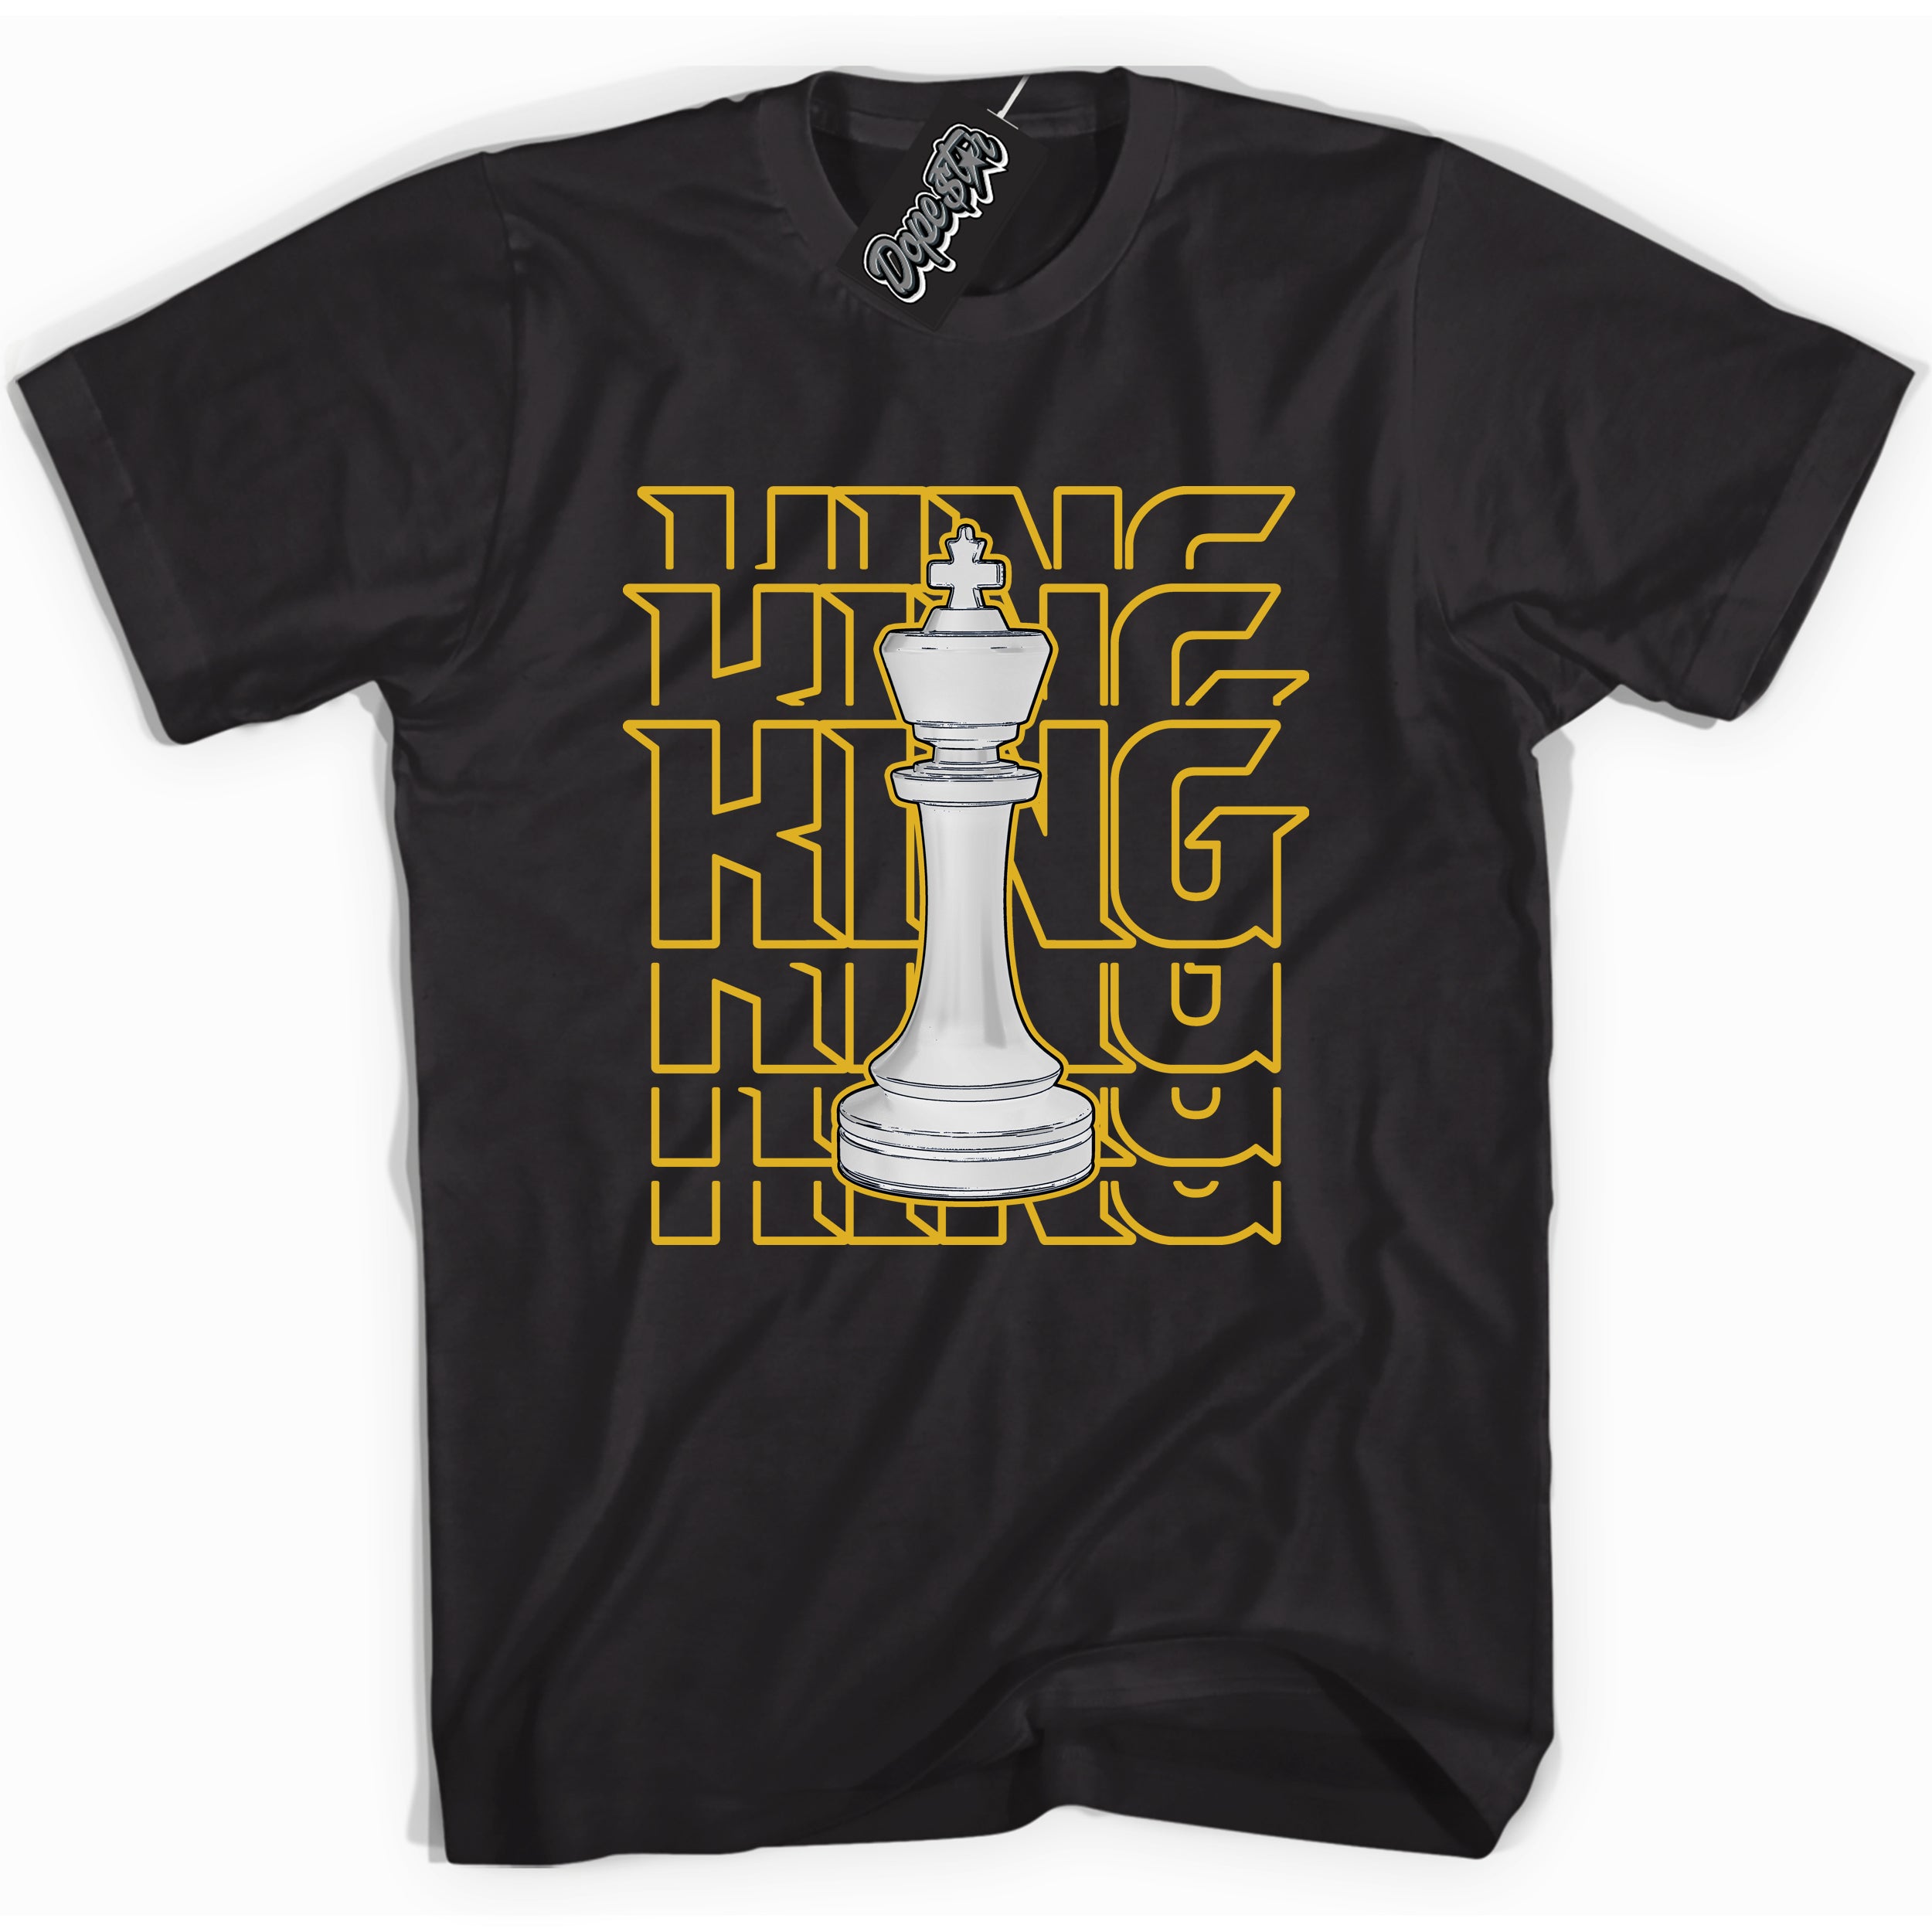 Cool Black Shirt with “ King Chess ” design that perfectly matches Yellow Ochre 6s Sneakers.